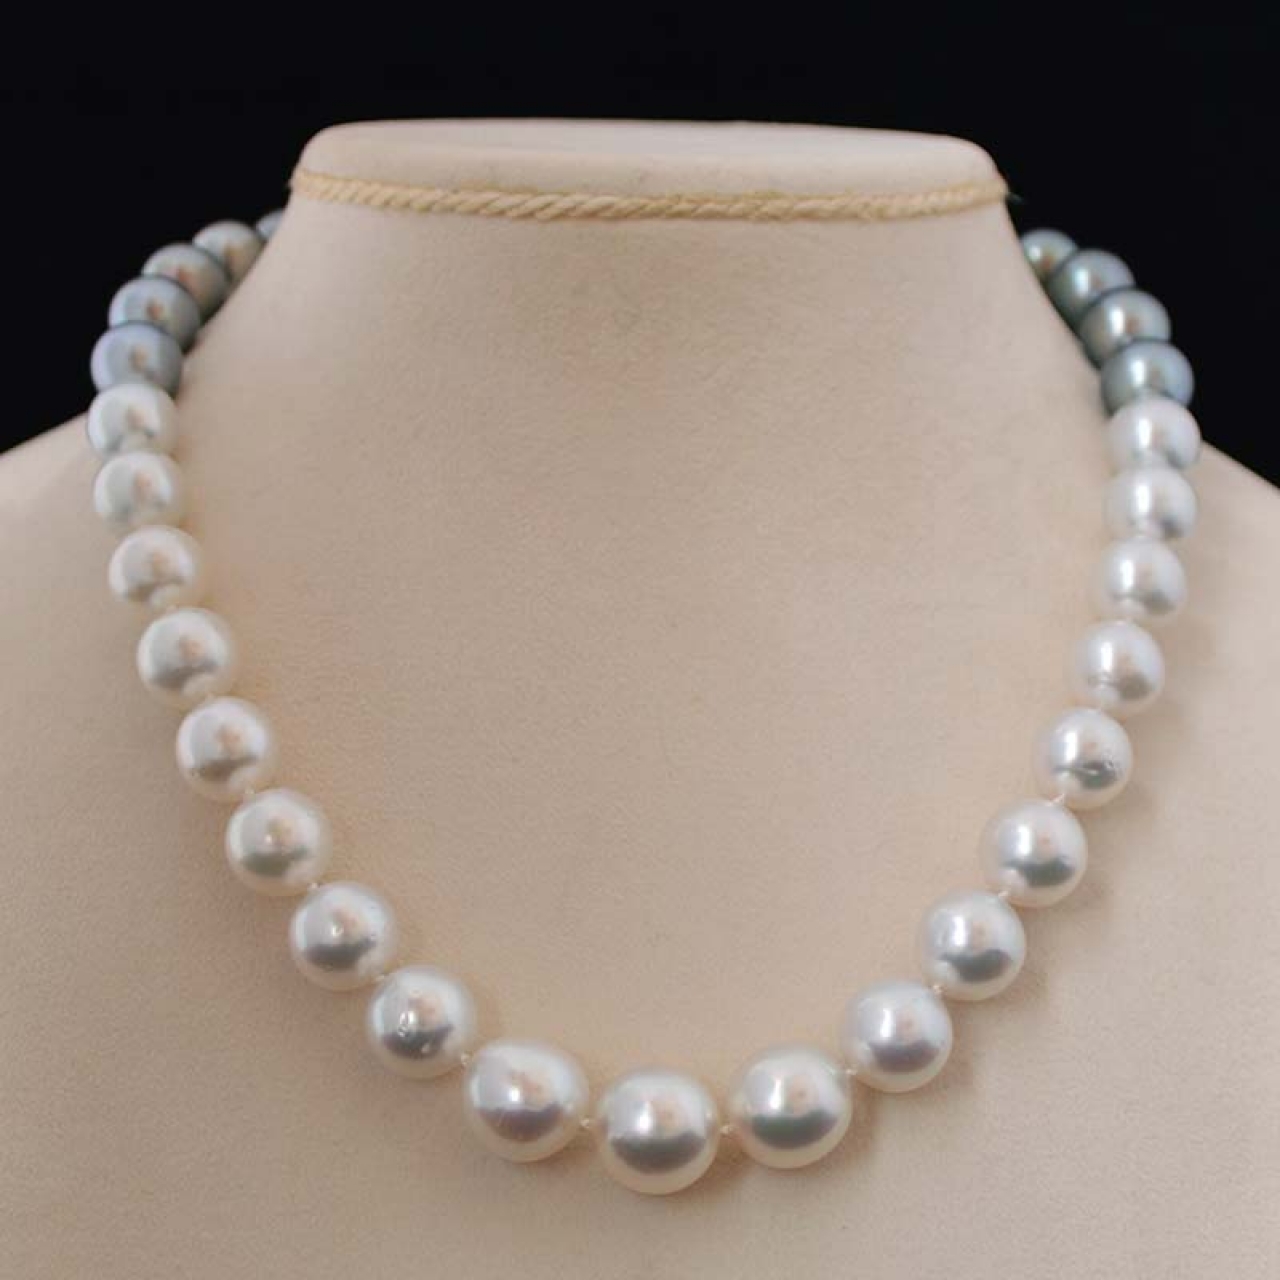 South Sea and Tahitian pearl necklace - Rocks and Clocks